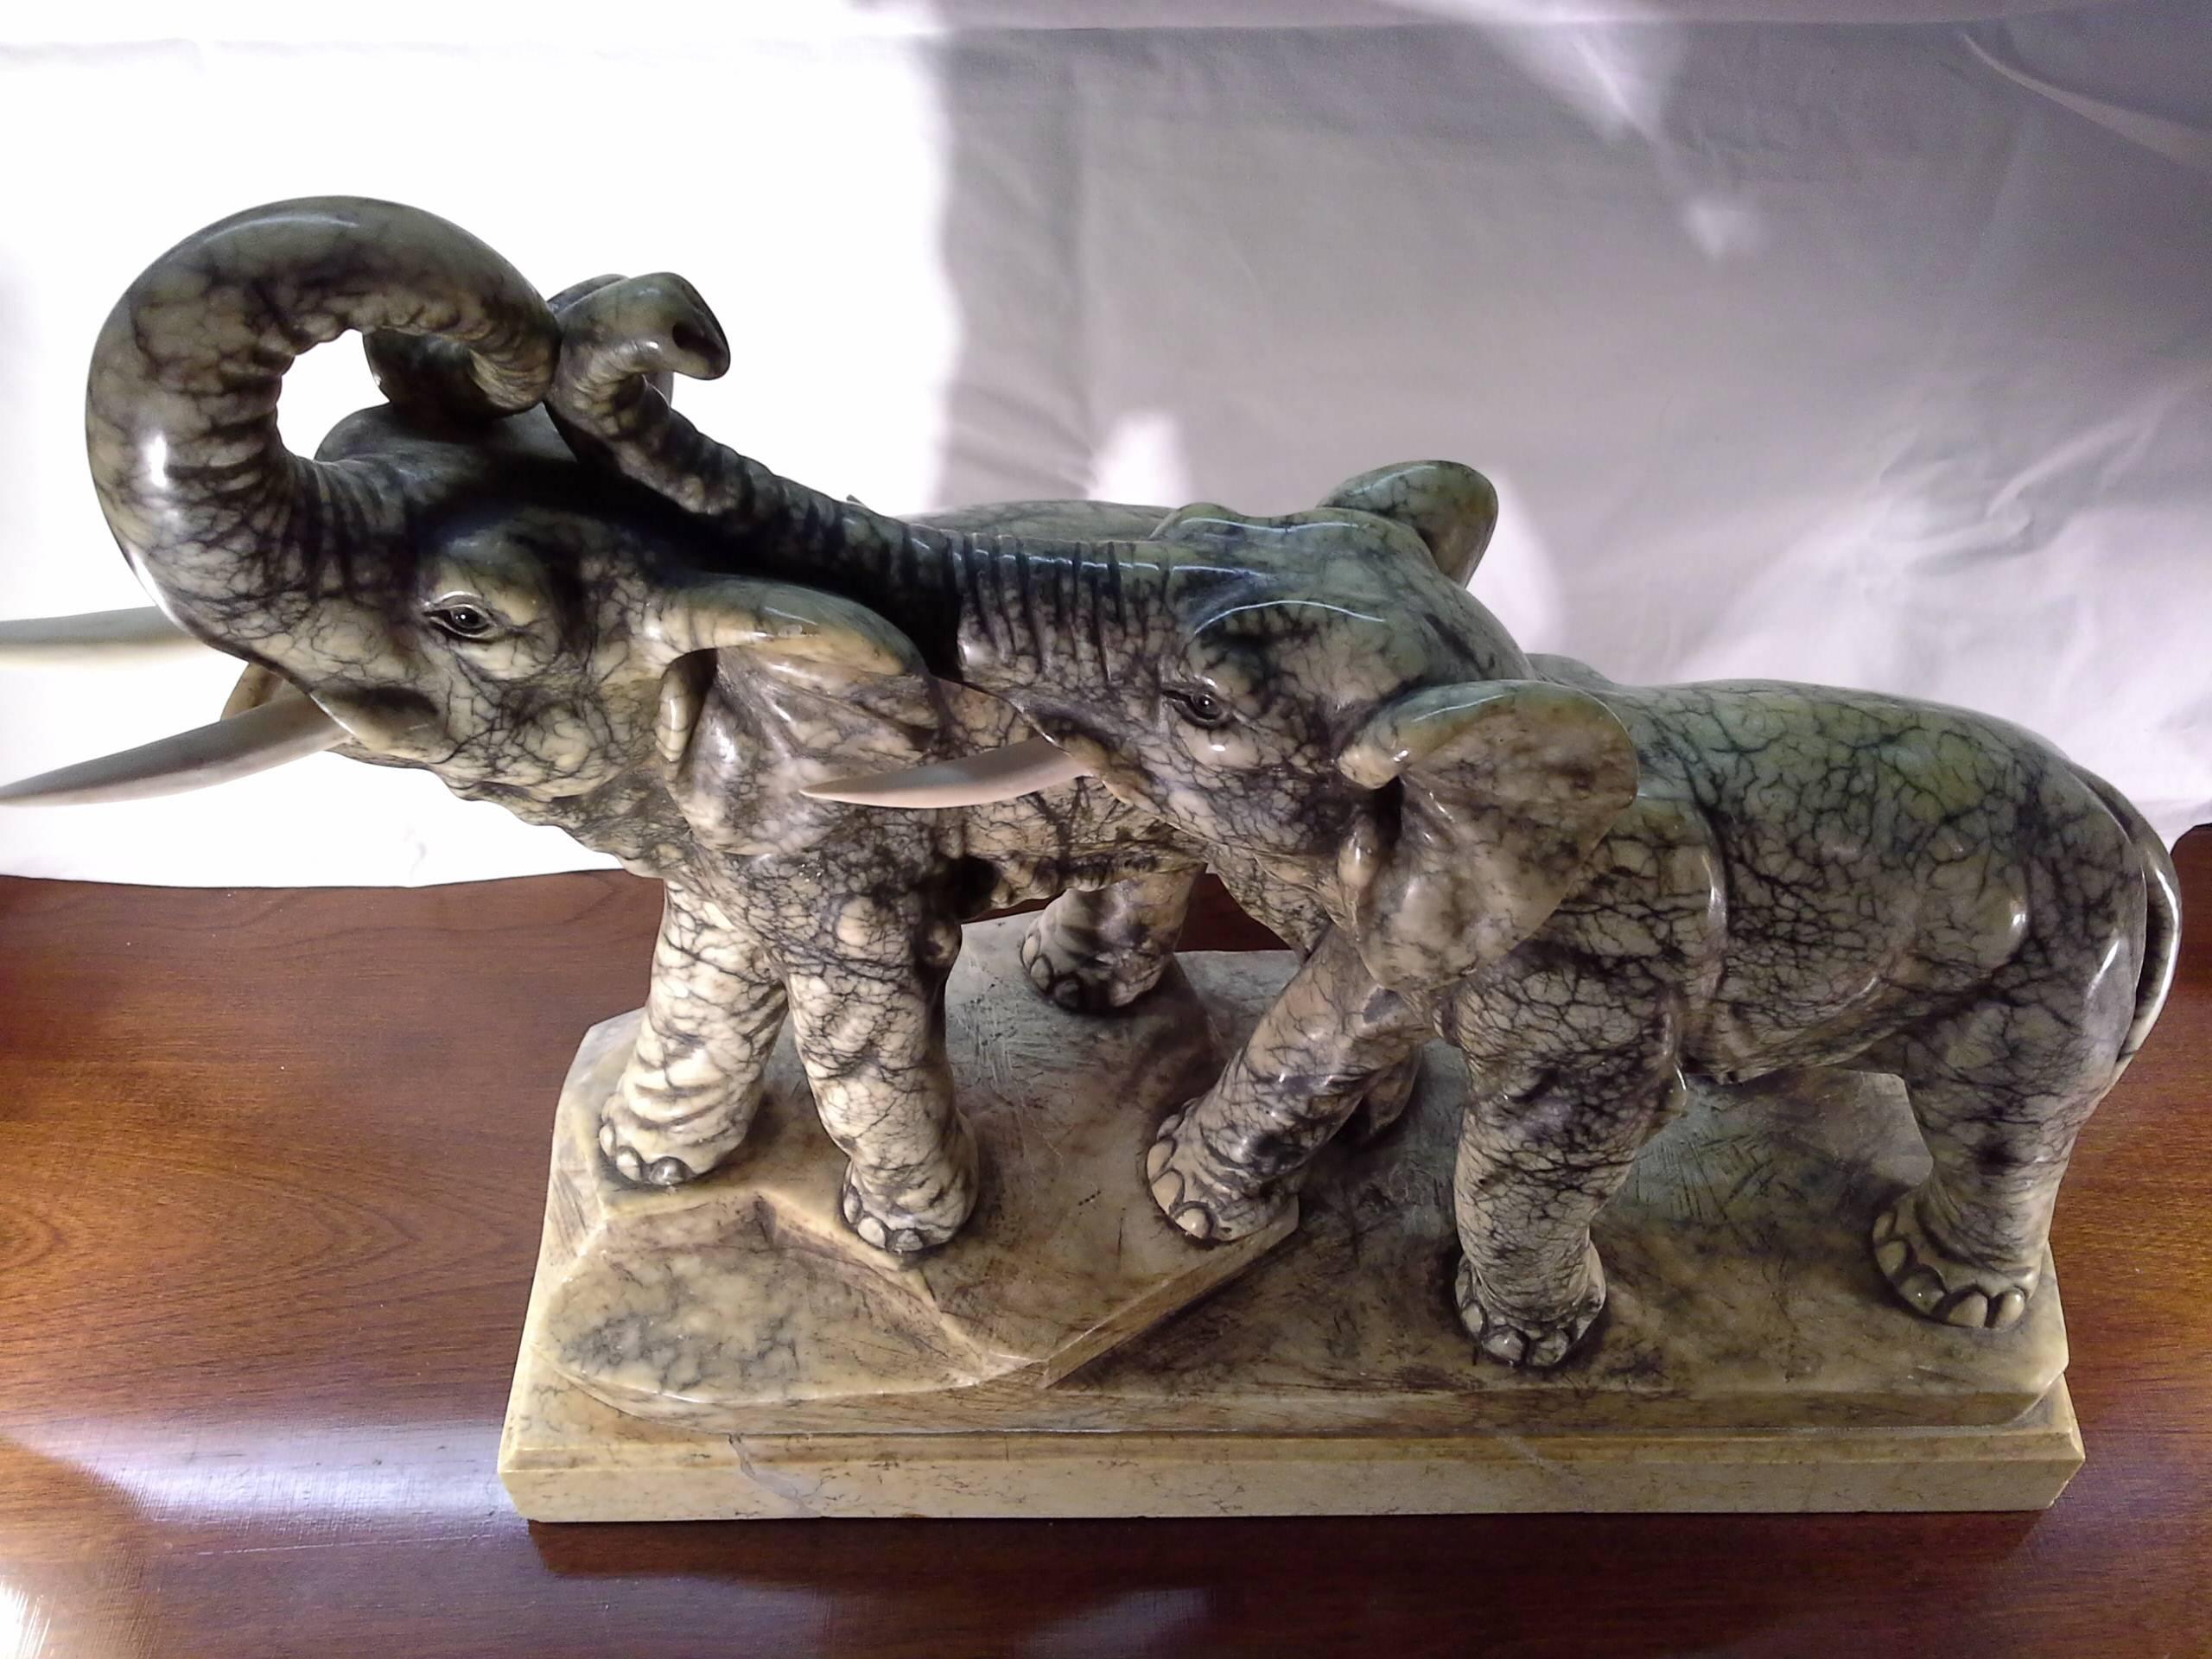 1930's Italian Alabaster Carved &Mounted on a Marble Base, A Sculpture of 2 Bull Elephants with Bone Tusks, Both up raised trunks and bone tusks, Bought in Italy in 1930, Imported to New York.

 There are 7- pages of original purchase receipts,